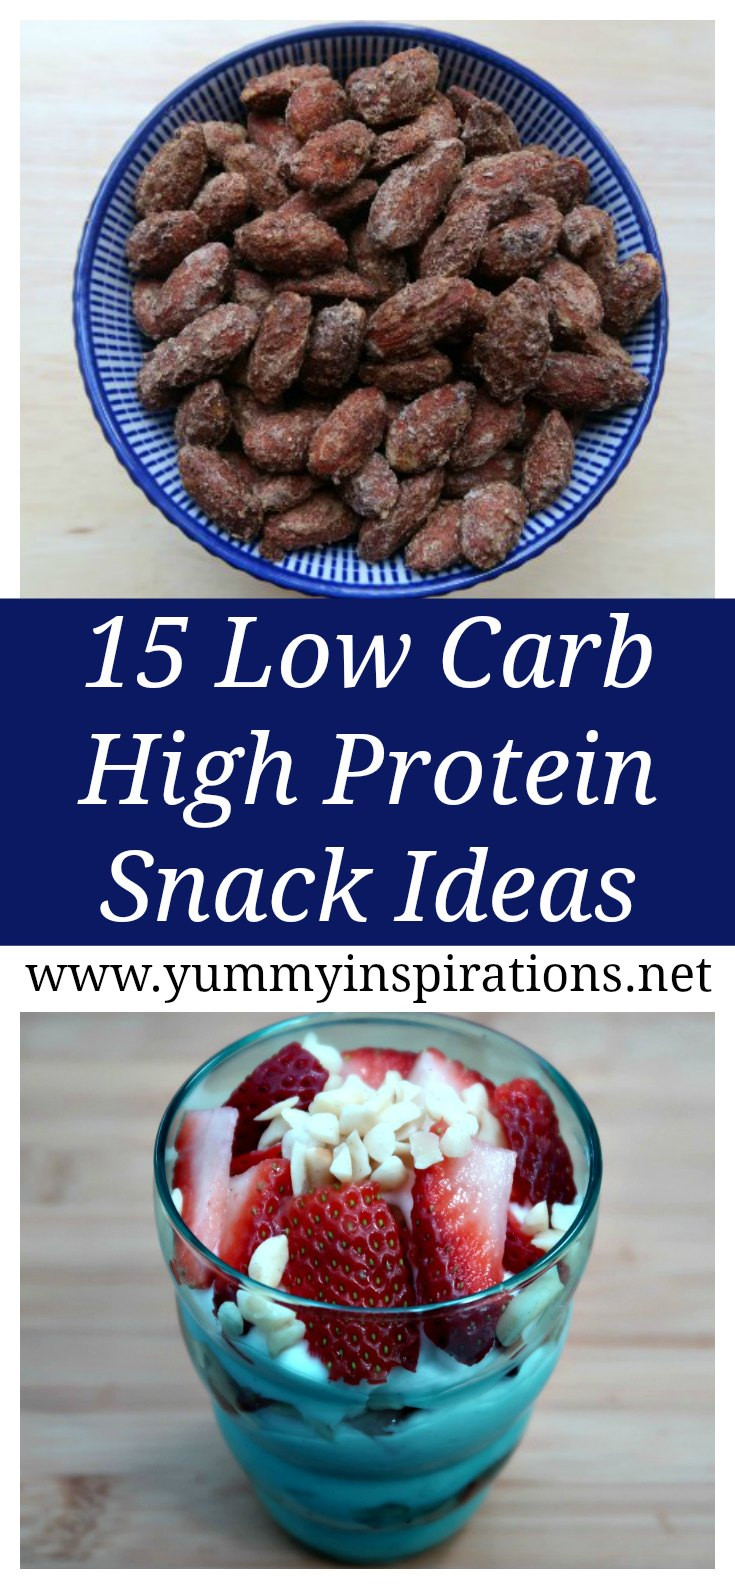 Snacks For Low Carb Diet
 15 Low Carb High Protein Snacks Ideas For Easy Keto Diet